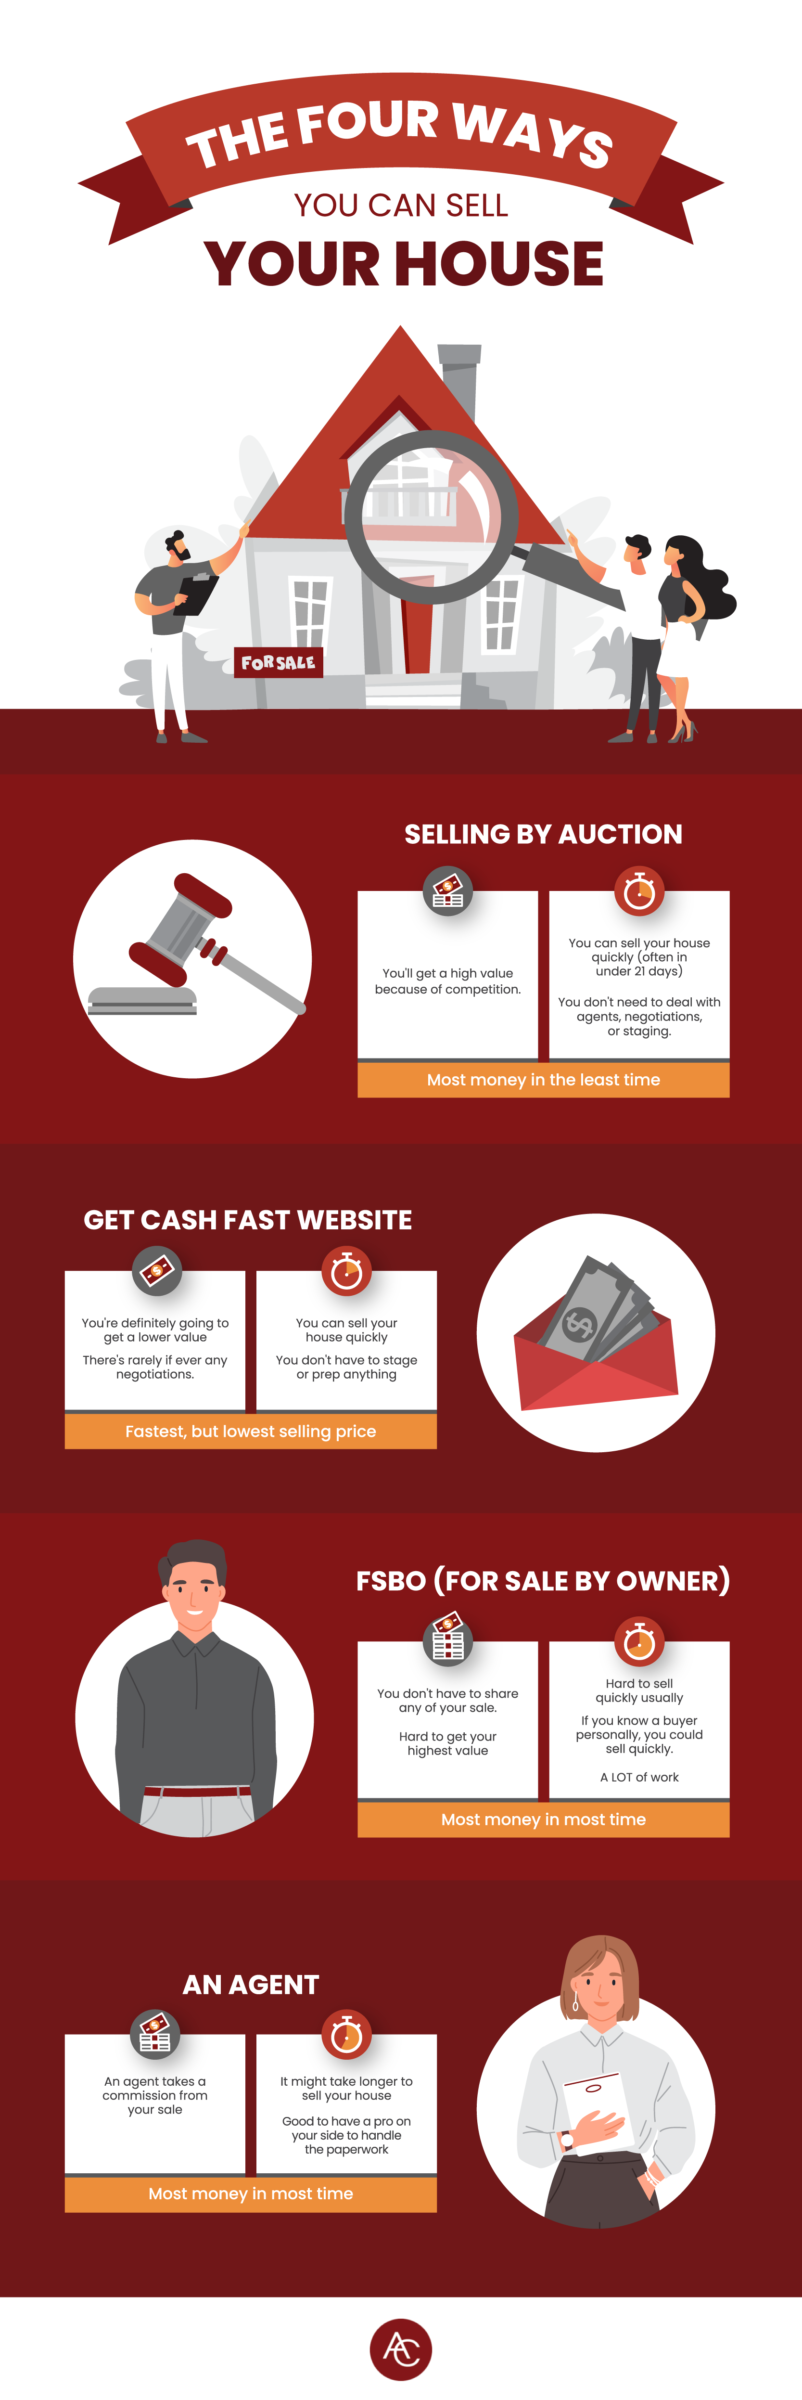 Sell My House : How To Sell A House Fast And Get The Most Money